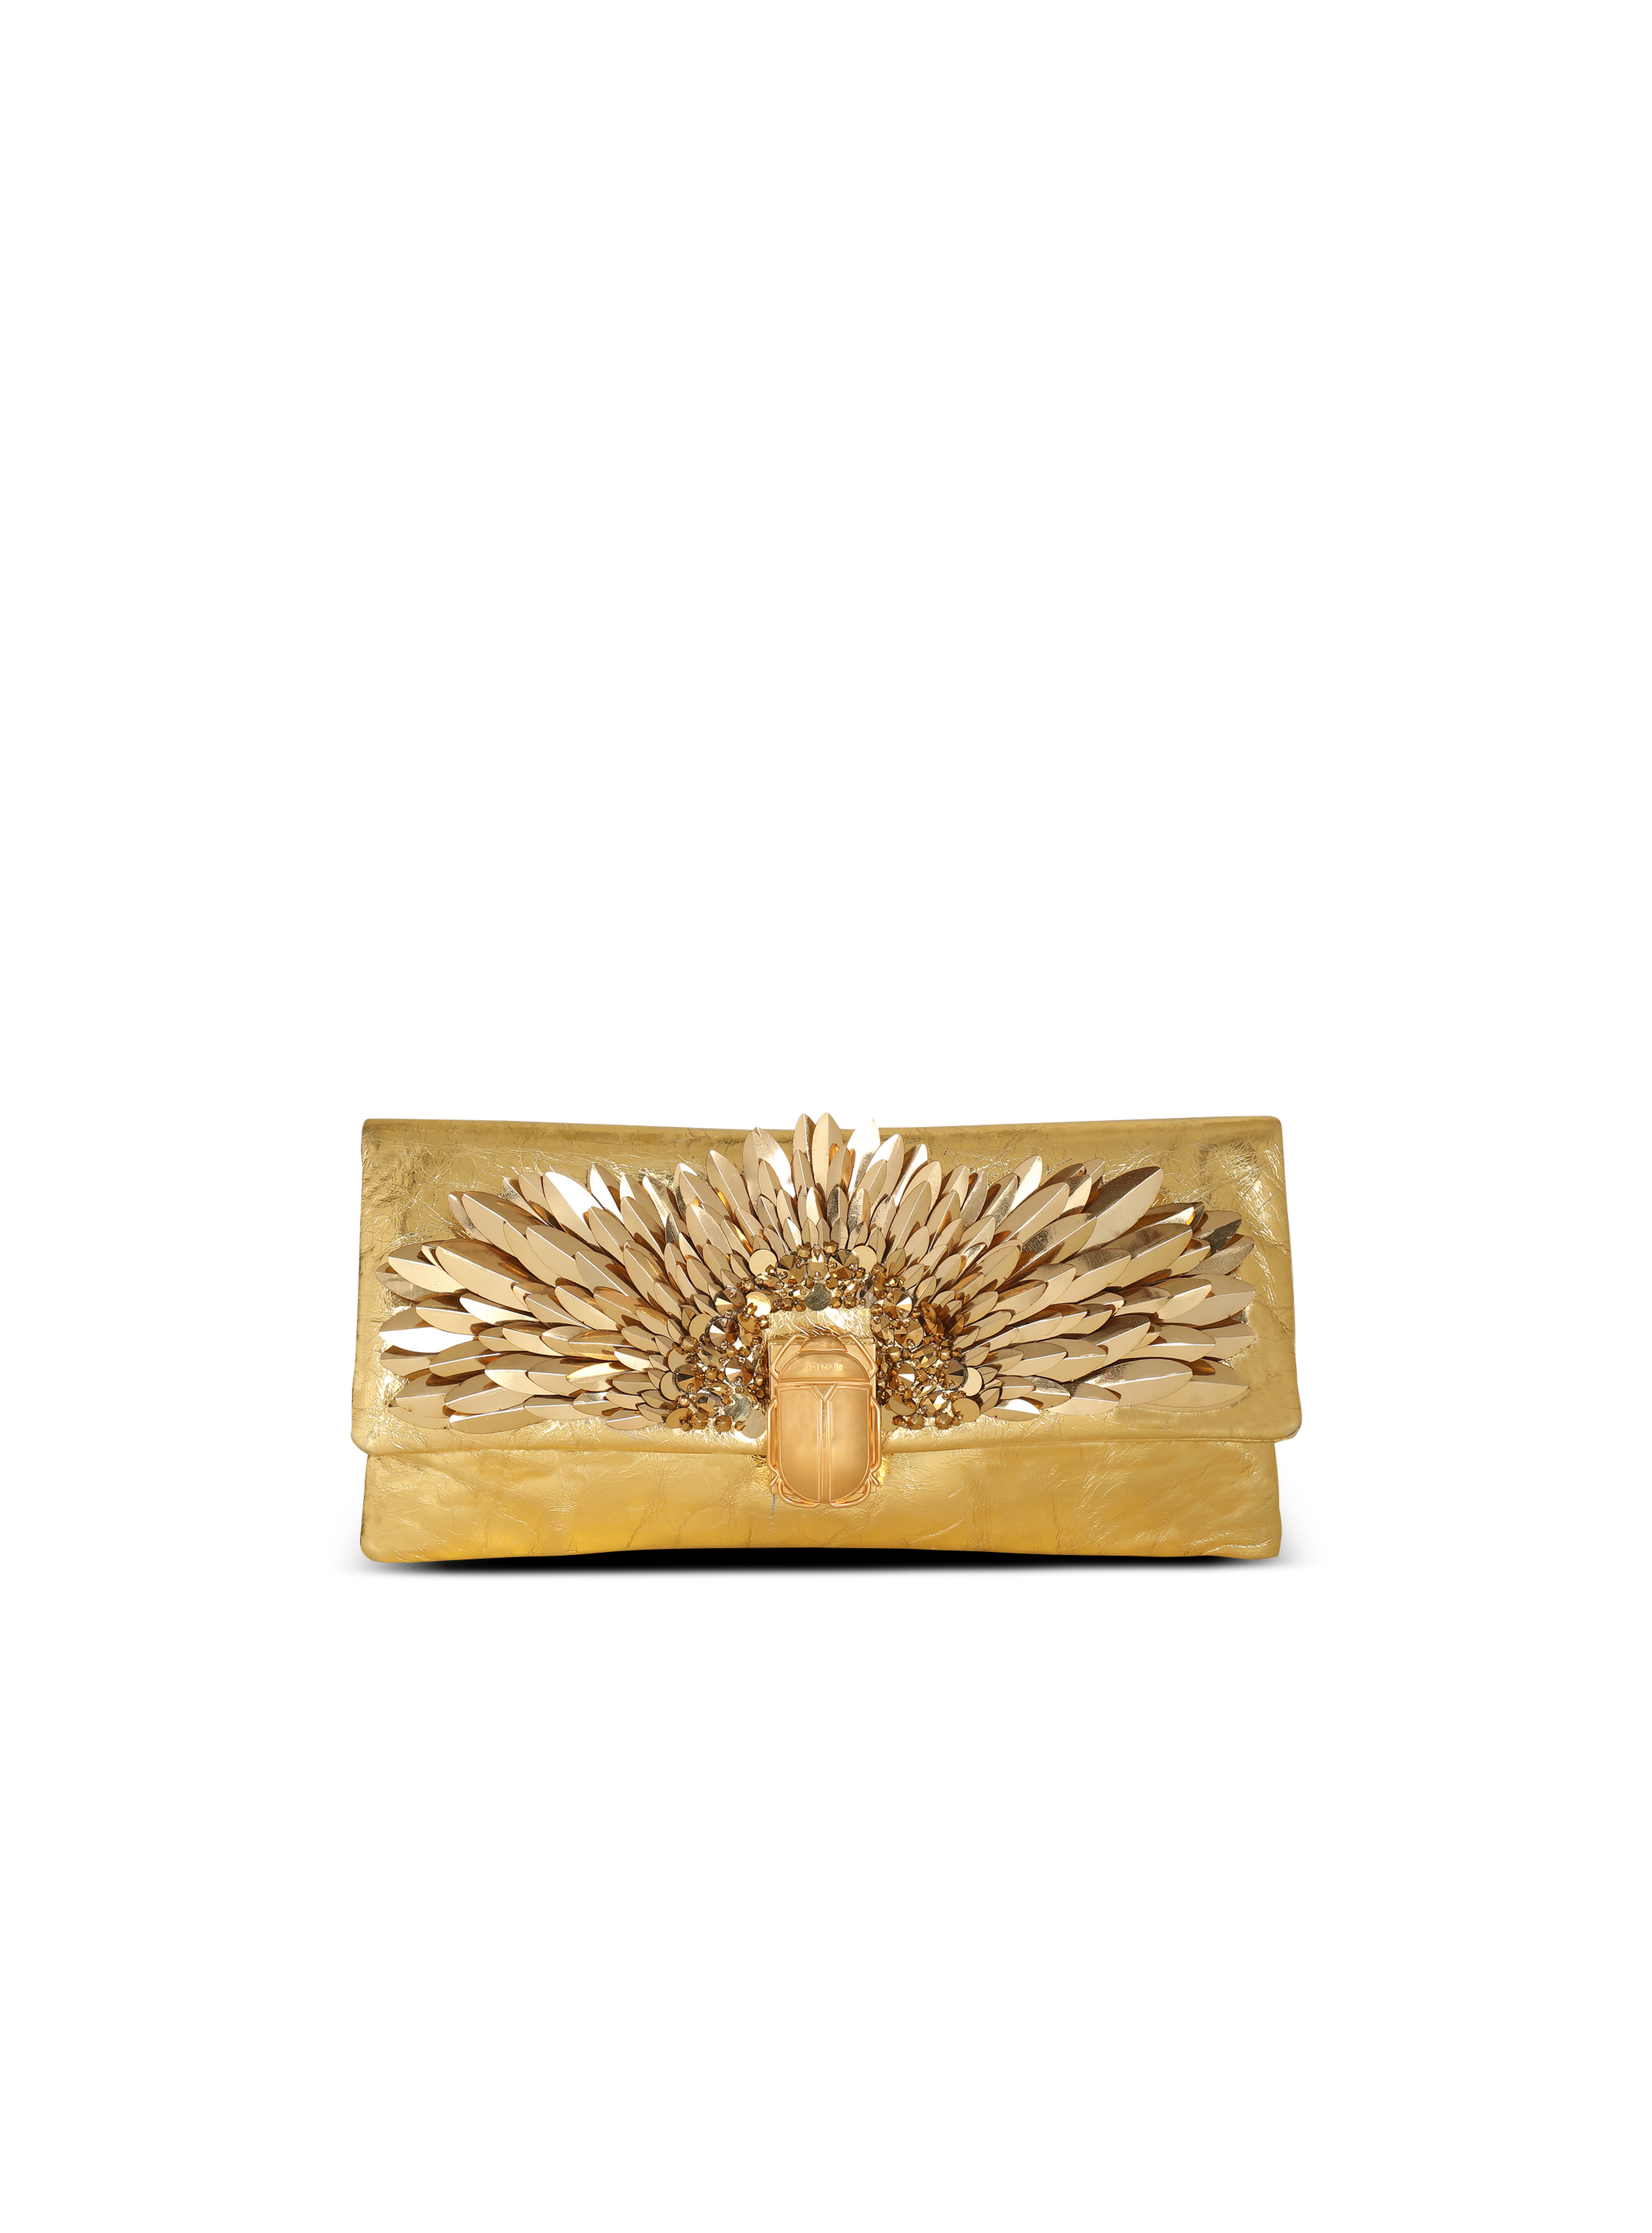 1945 Soft clutch bag in smooth embroidered leather, gold